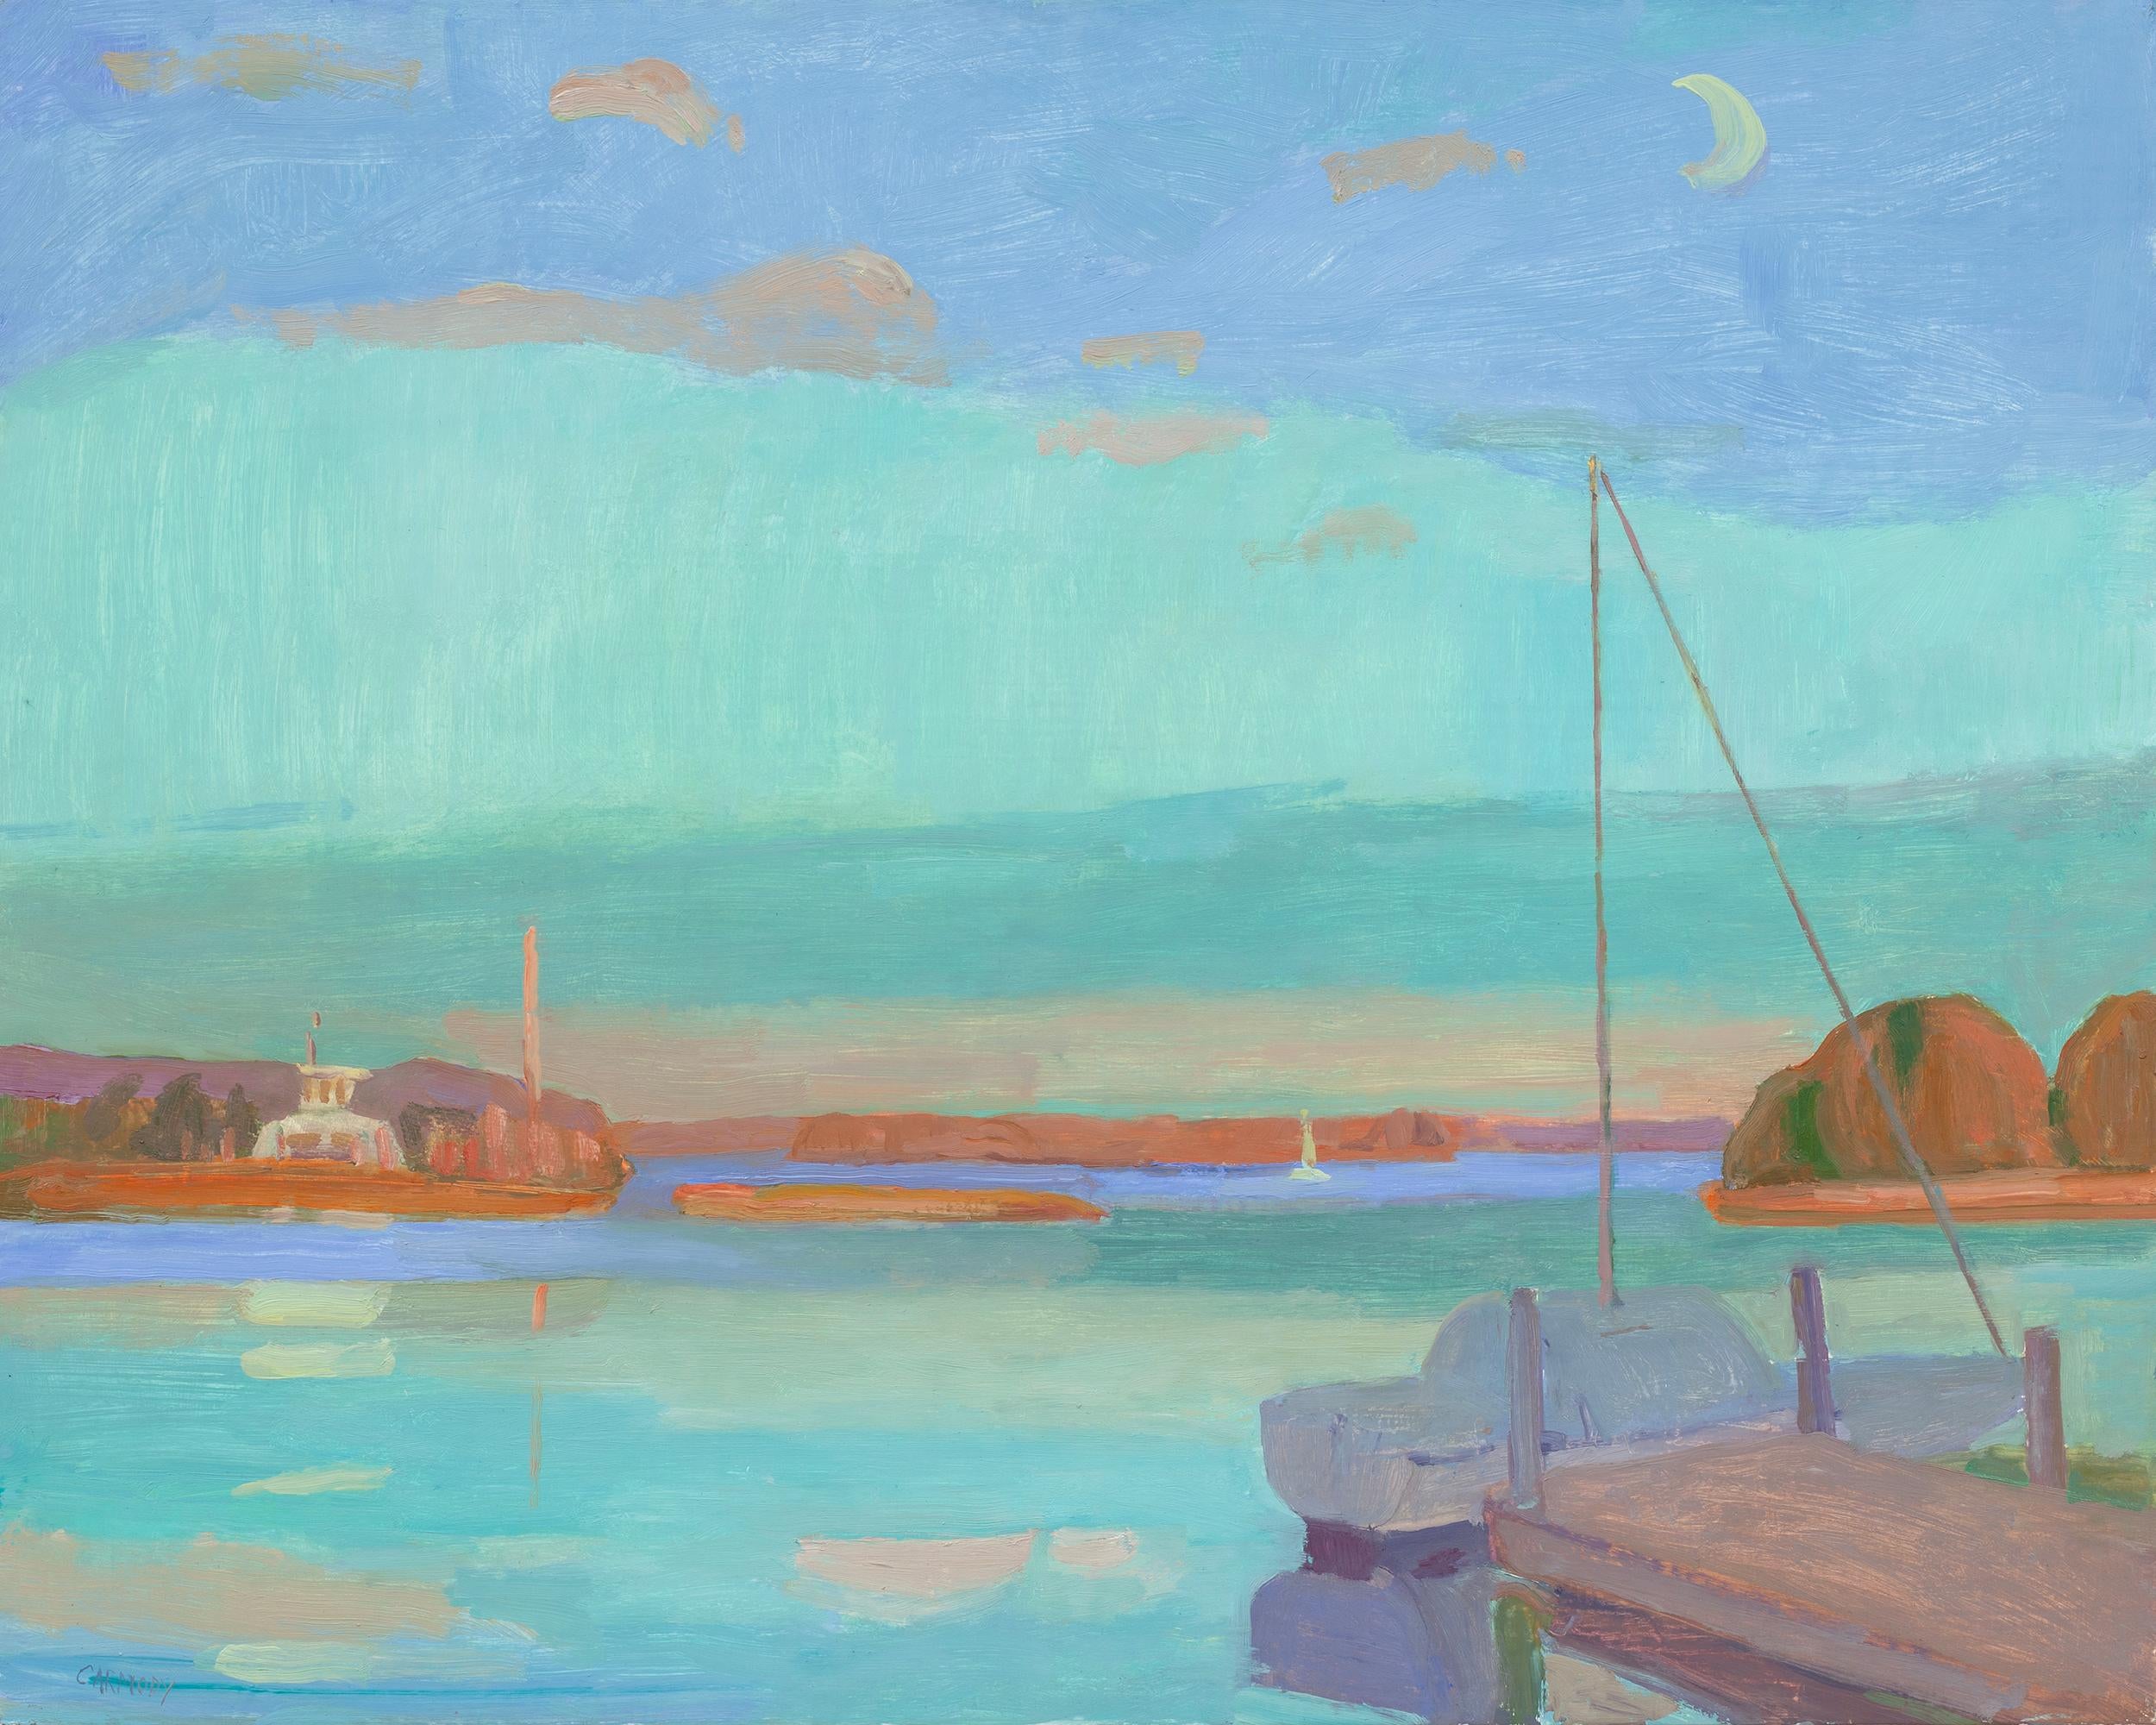 Kelly Carmody Abstract Painting - "View from Shelter Island" contemporary landscape of harbor in shades of blue